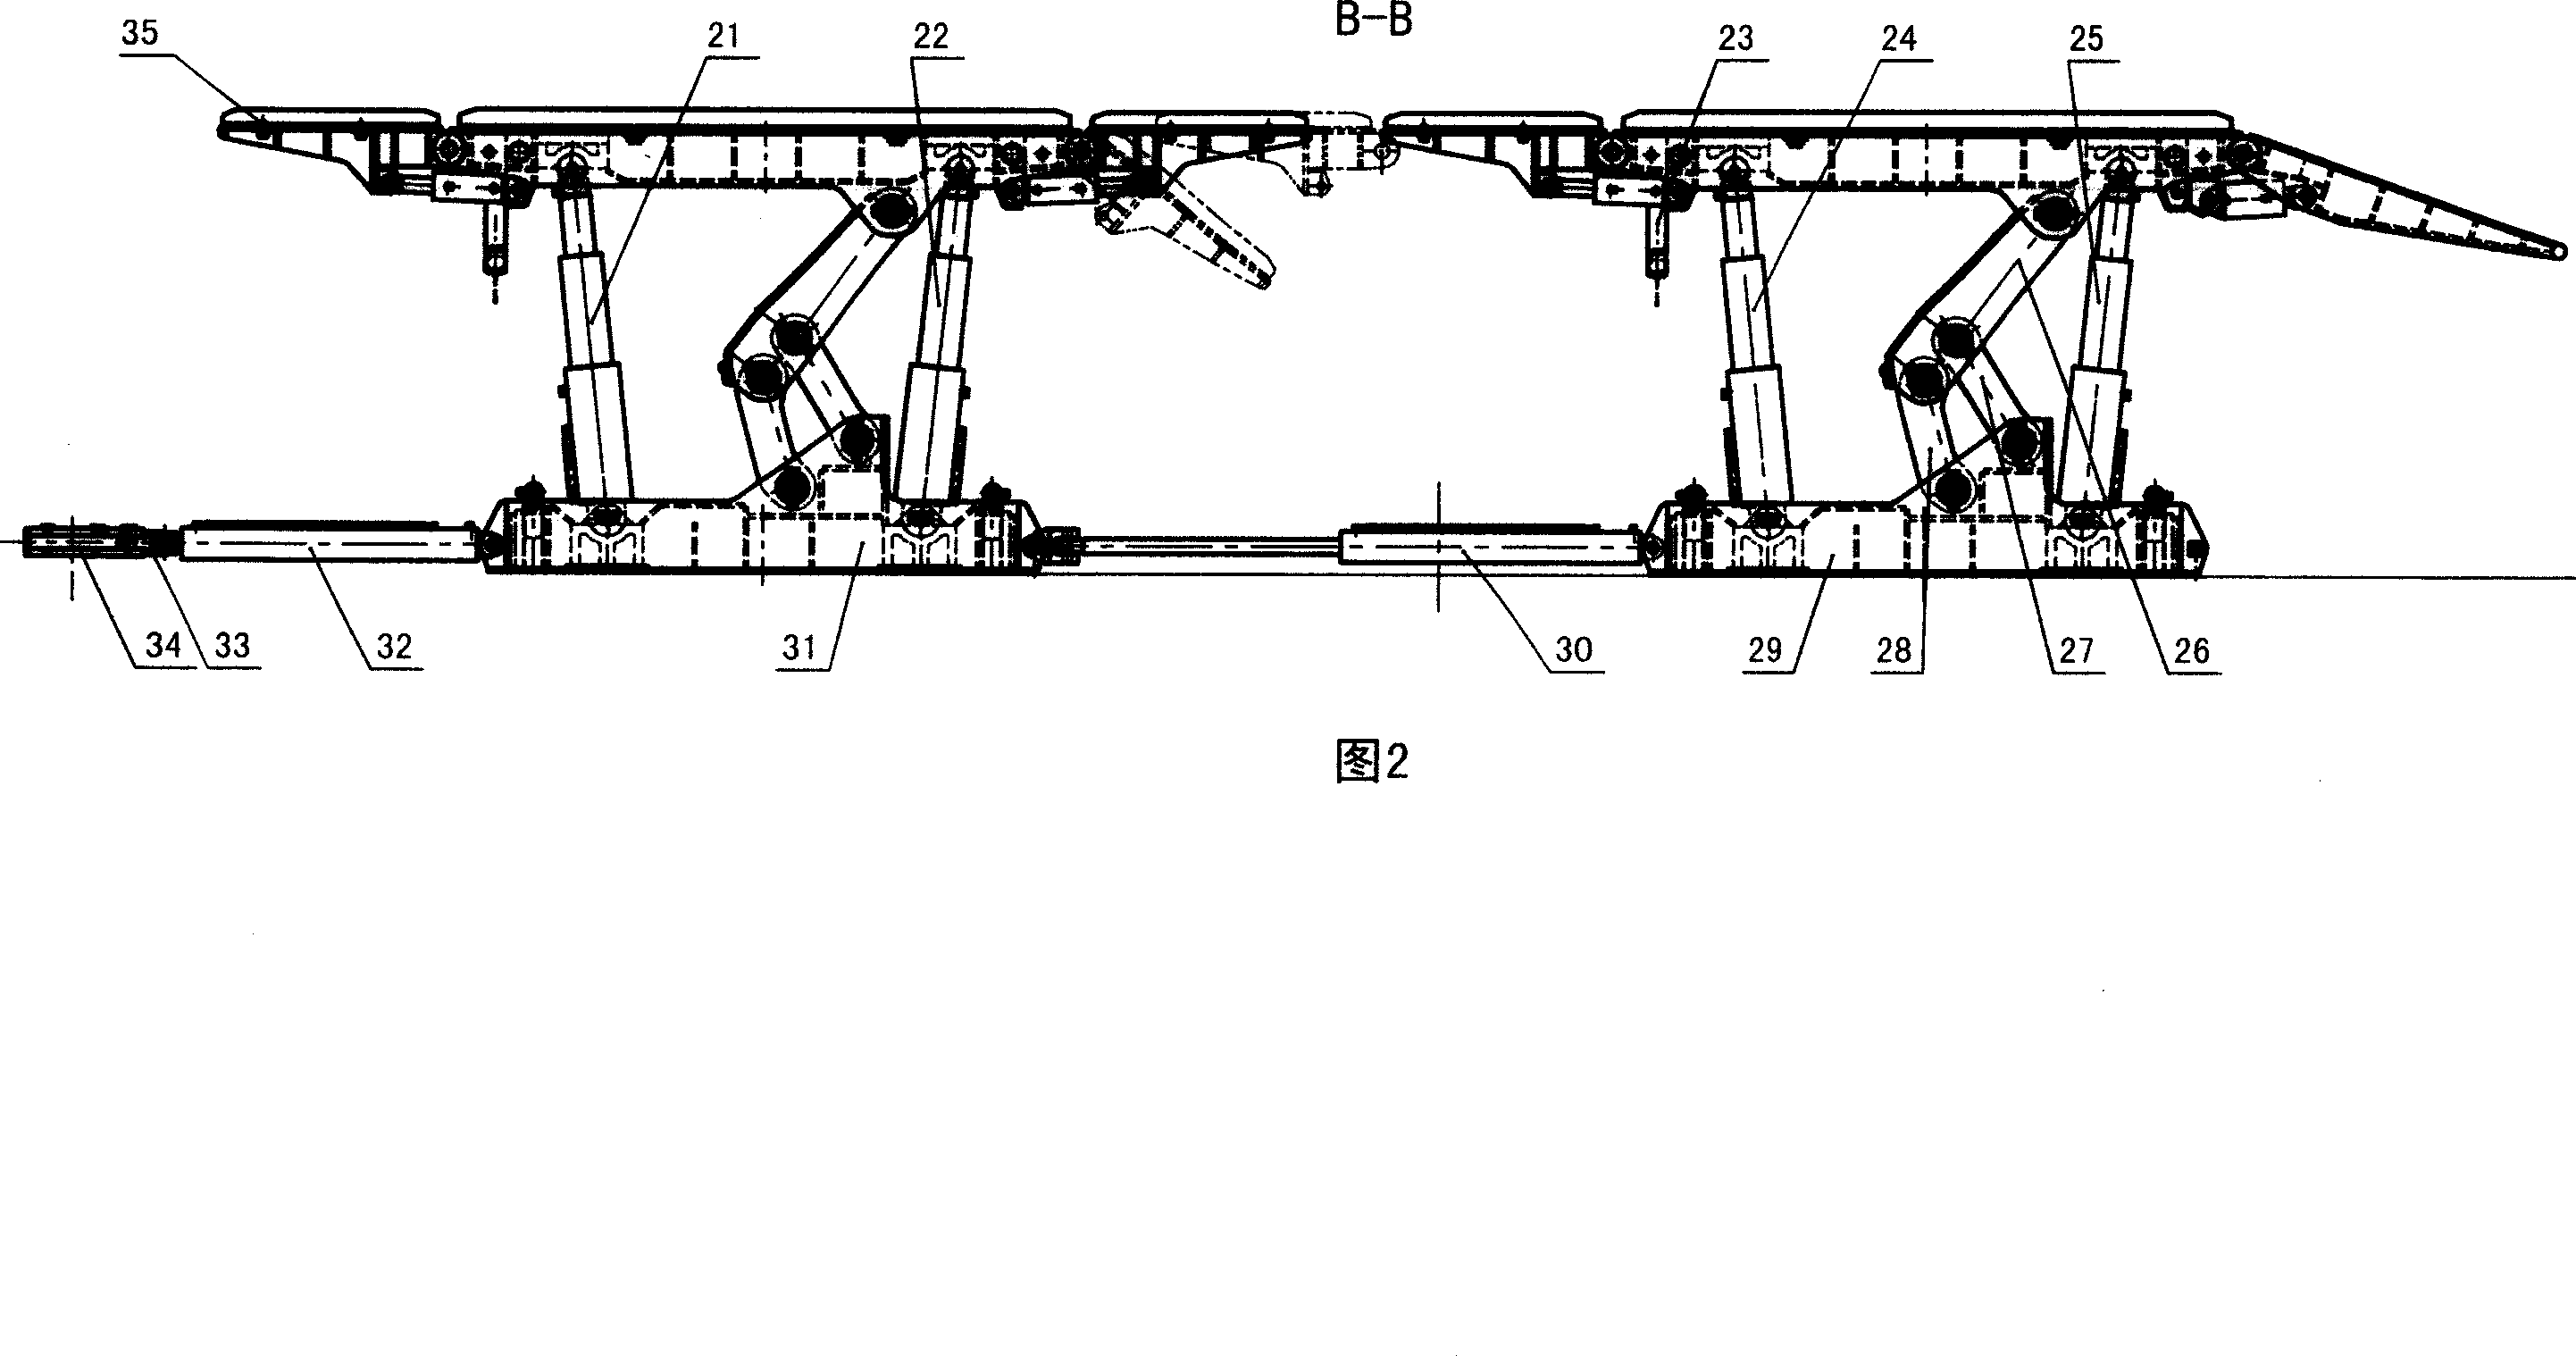 Fully mechanized working faces along conveying end head bracket